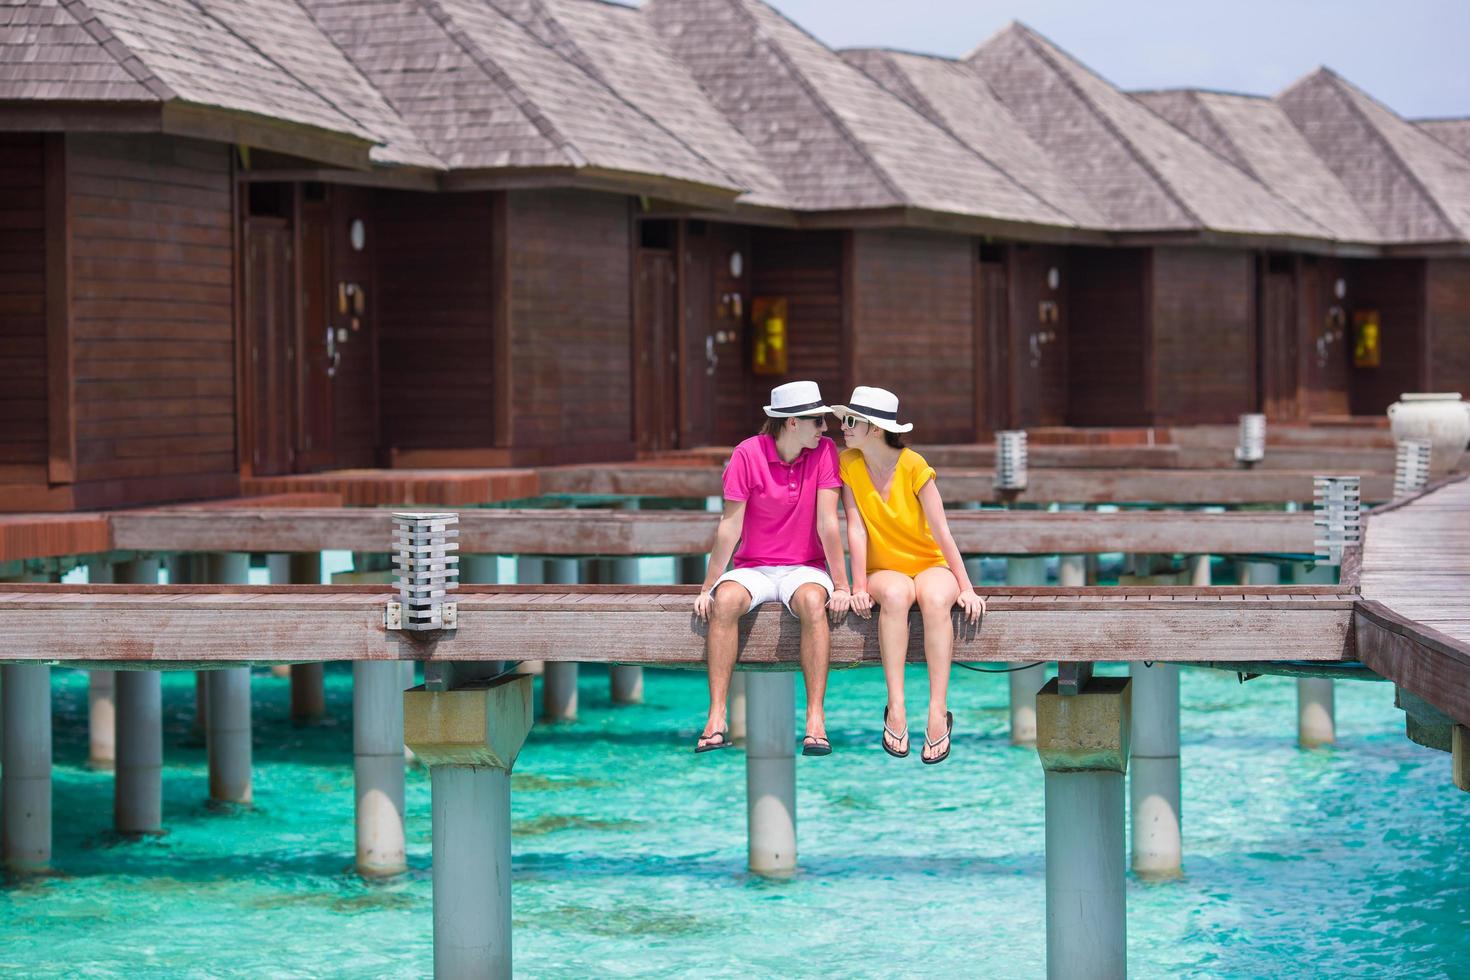 Maldives, South Asia, 2020 - Young couple on a tropical beach jetty near a water bungalow photo